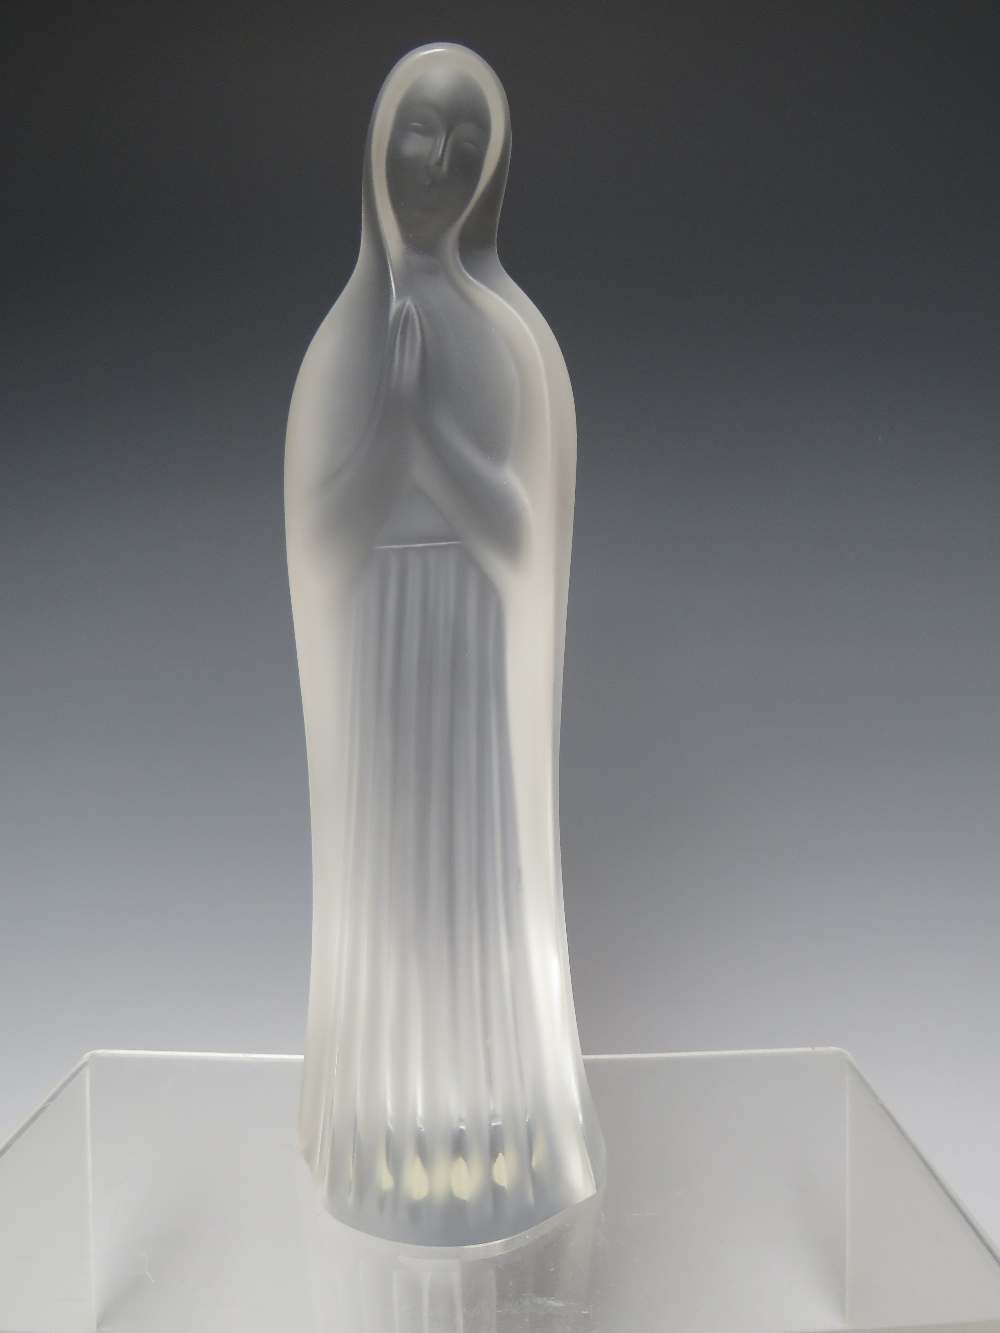 RENÉ LALIQUE (1860-1945). CRYSTAL FROSTED GLASS FIGURE OF THE VIRGIN MARY, with hands clasped